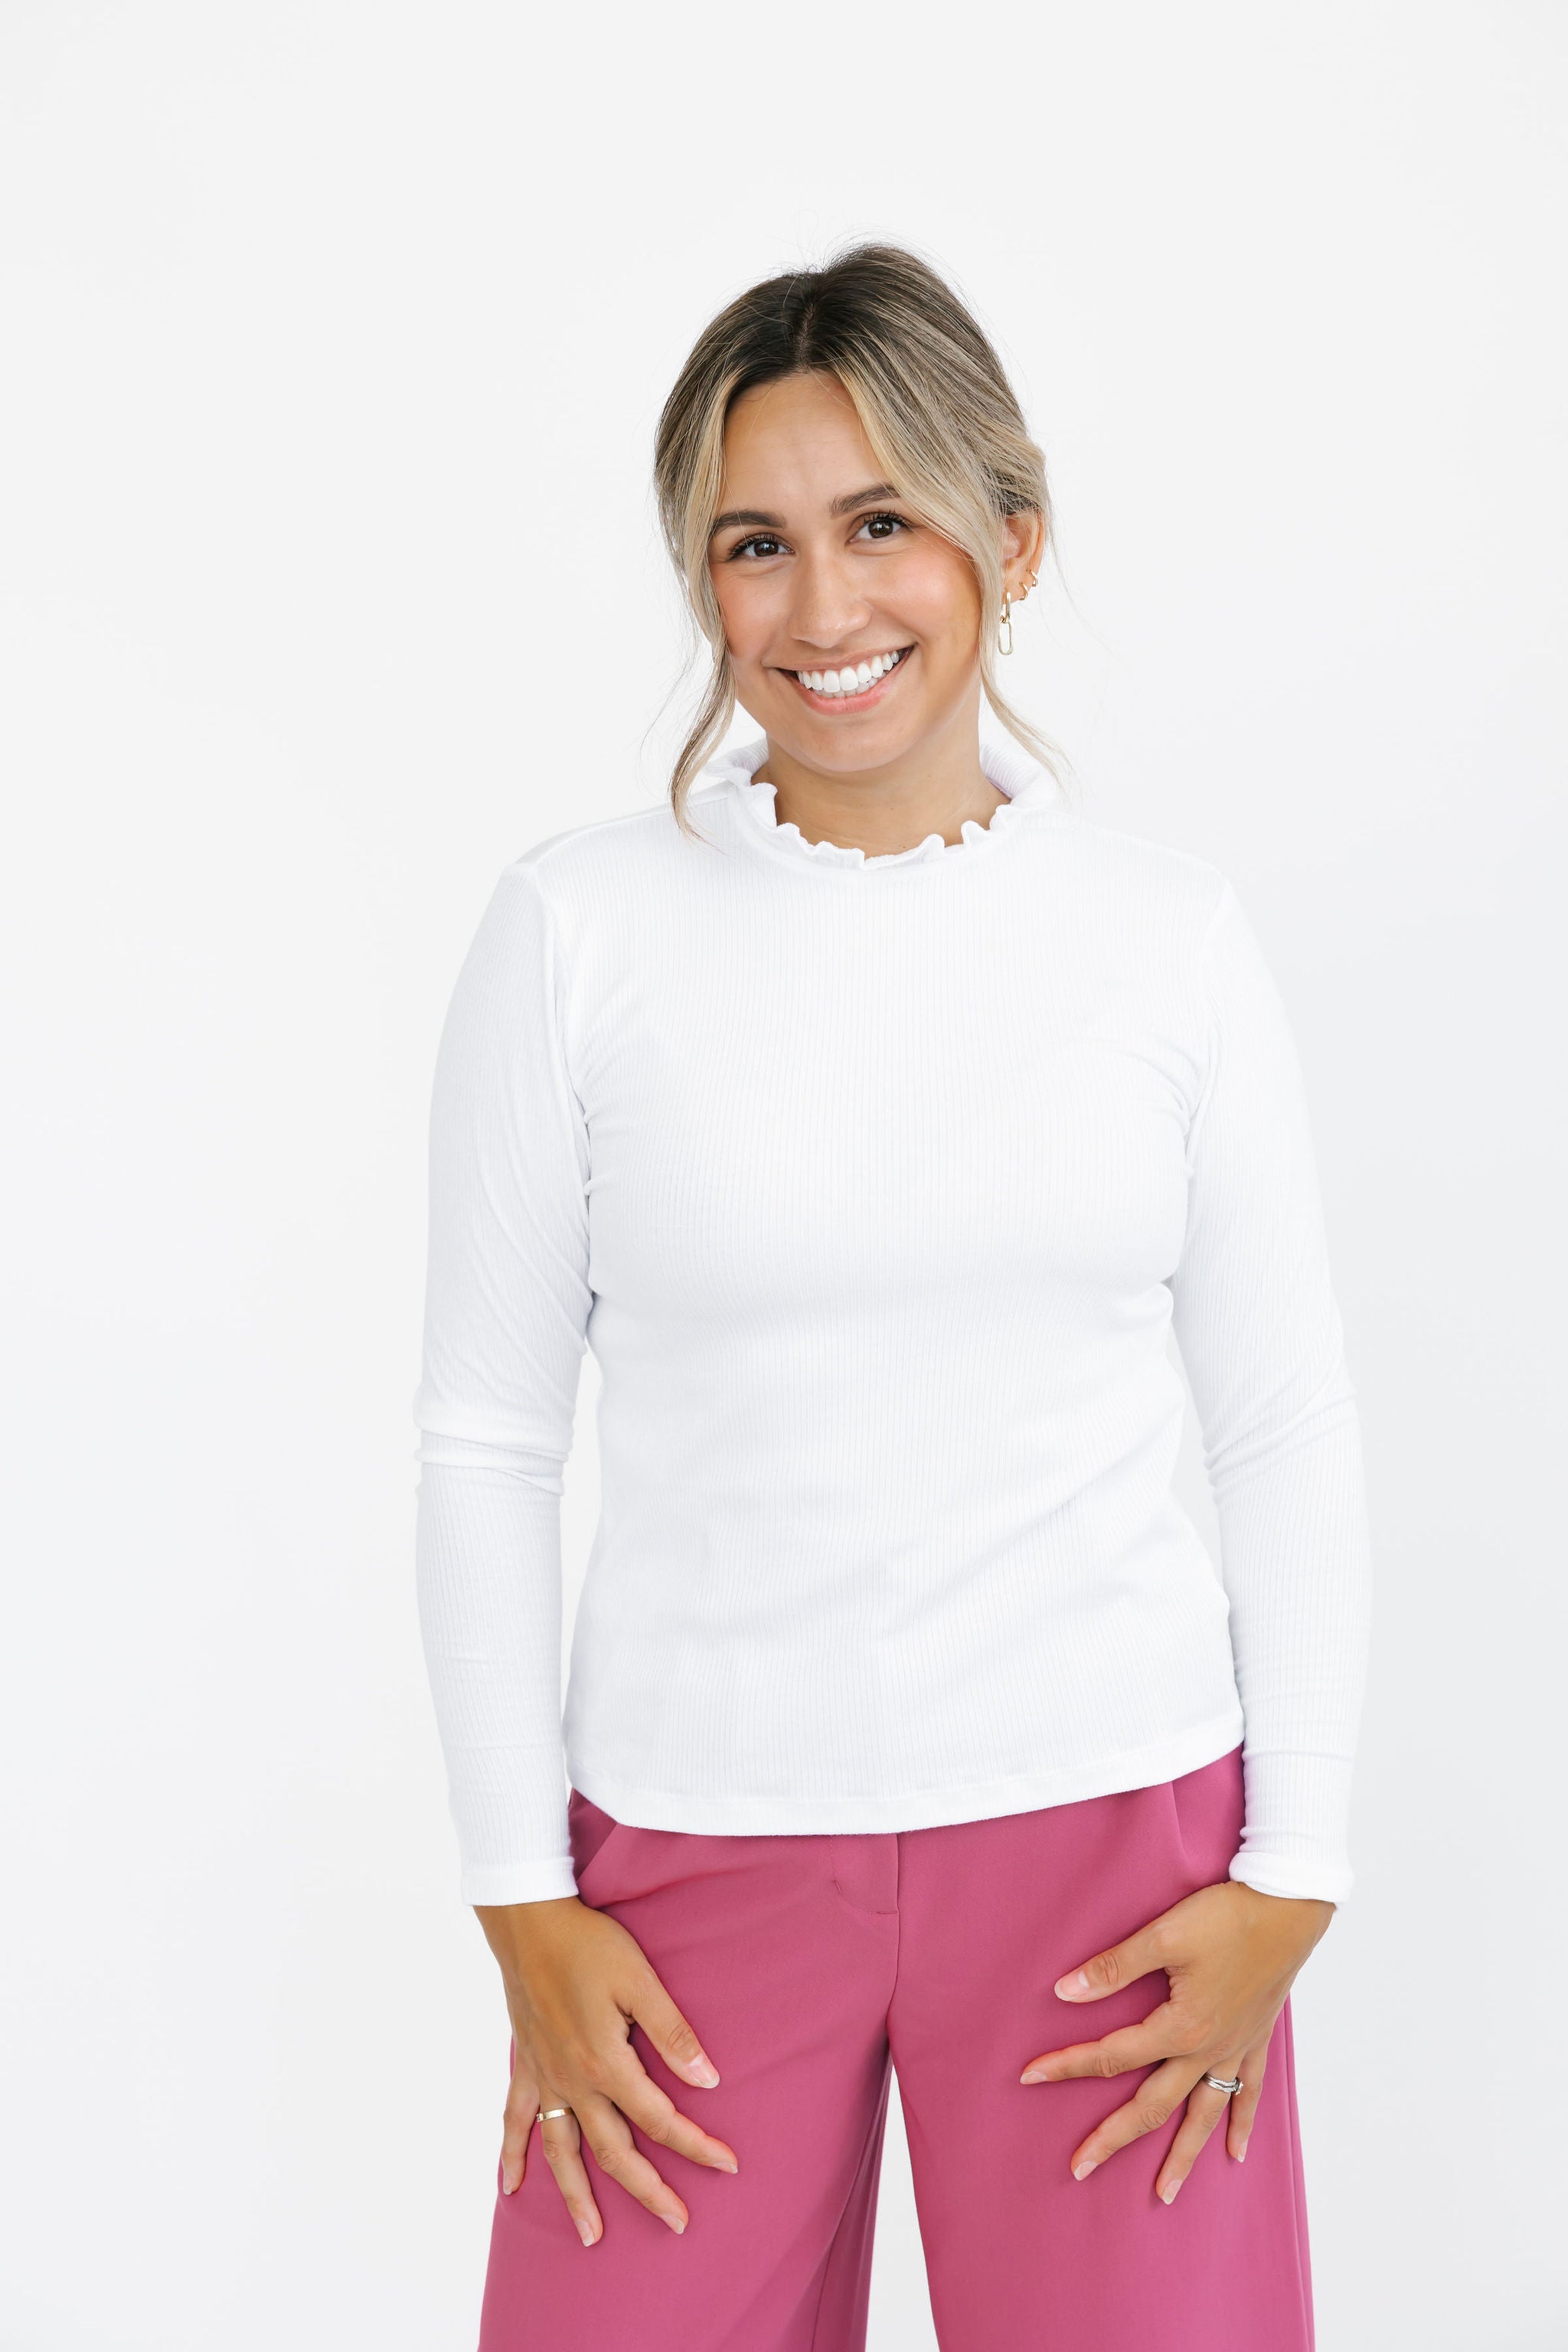 Claire Long Sleeve Tee in Bright White